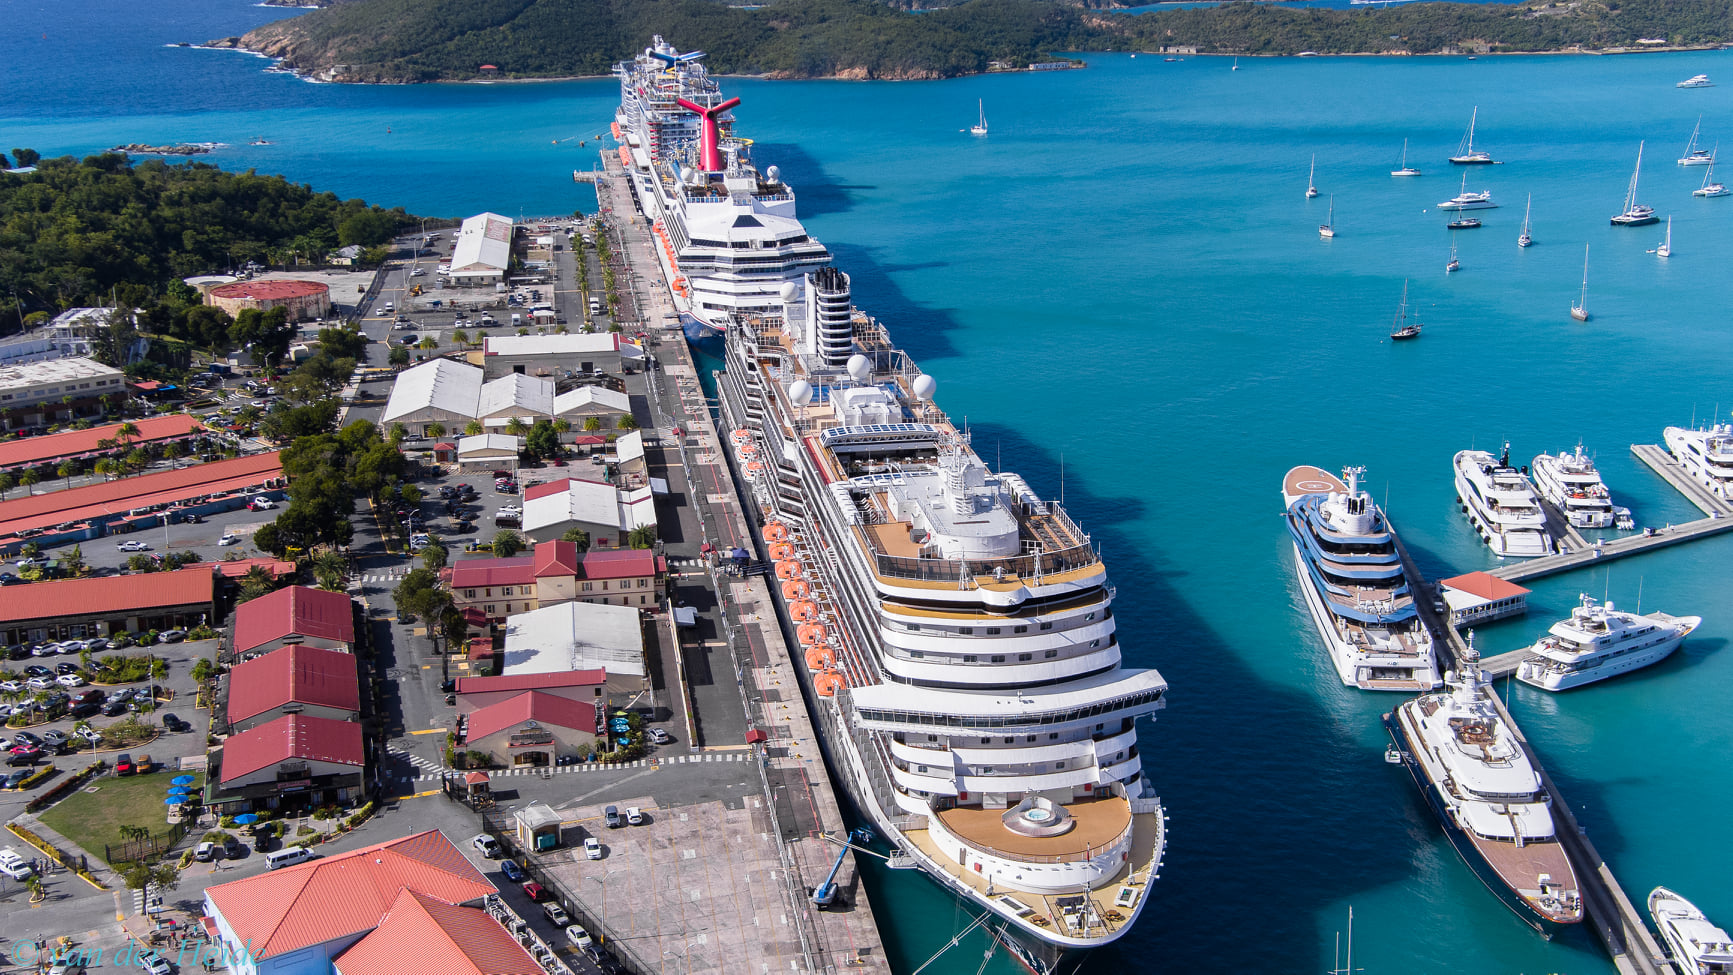 COVID-Plagued RCG Cruise Ship Symphony Of The Seas Docked In St. Thomas